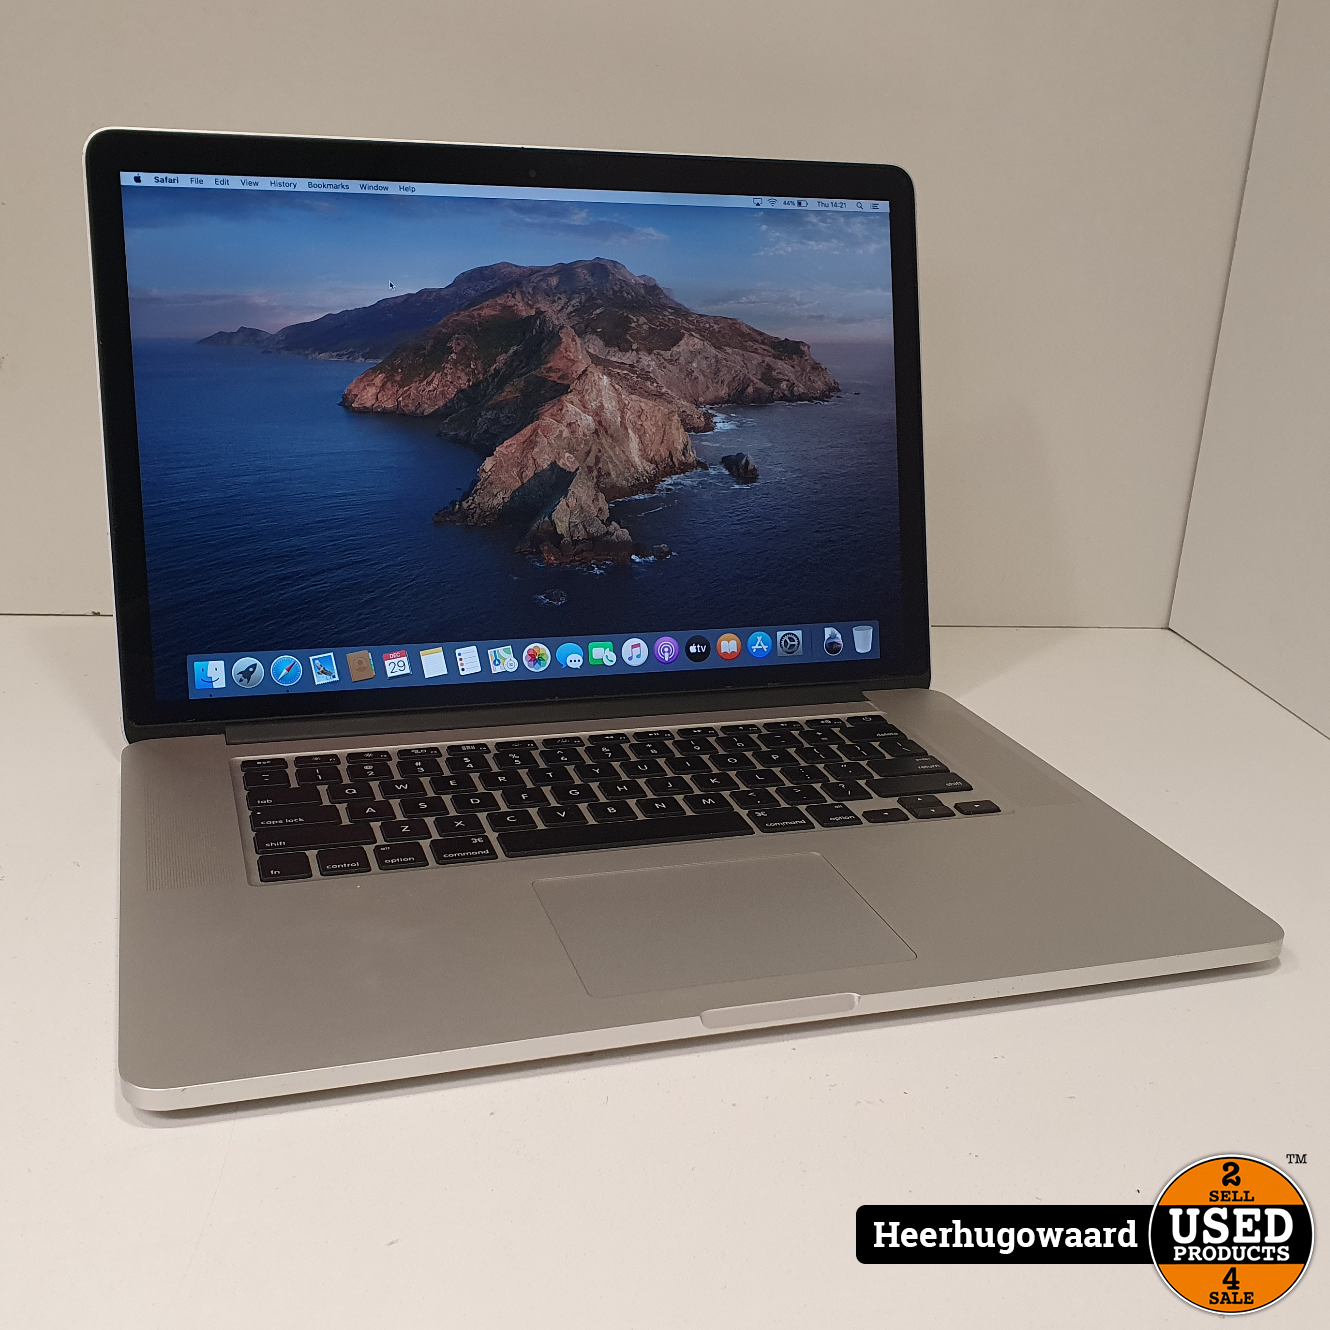 MacBook Pro 15 inch Mid 2014 - i7 16GB 256GB SSD - Used Products